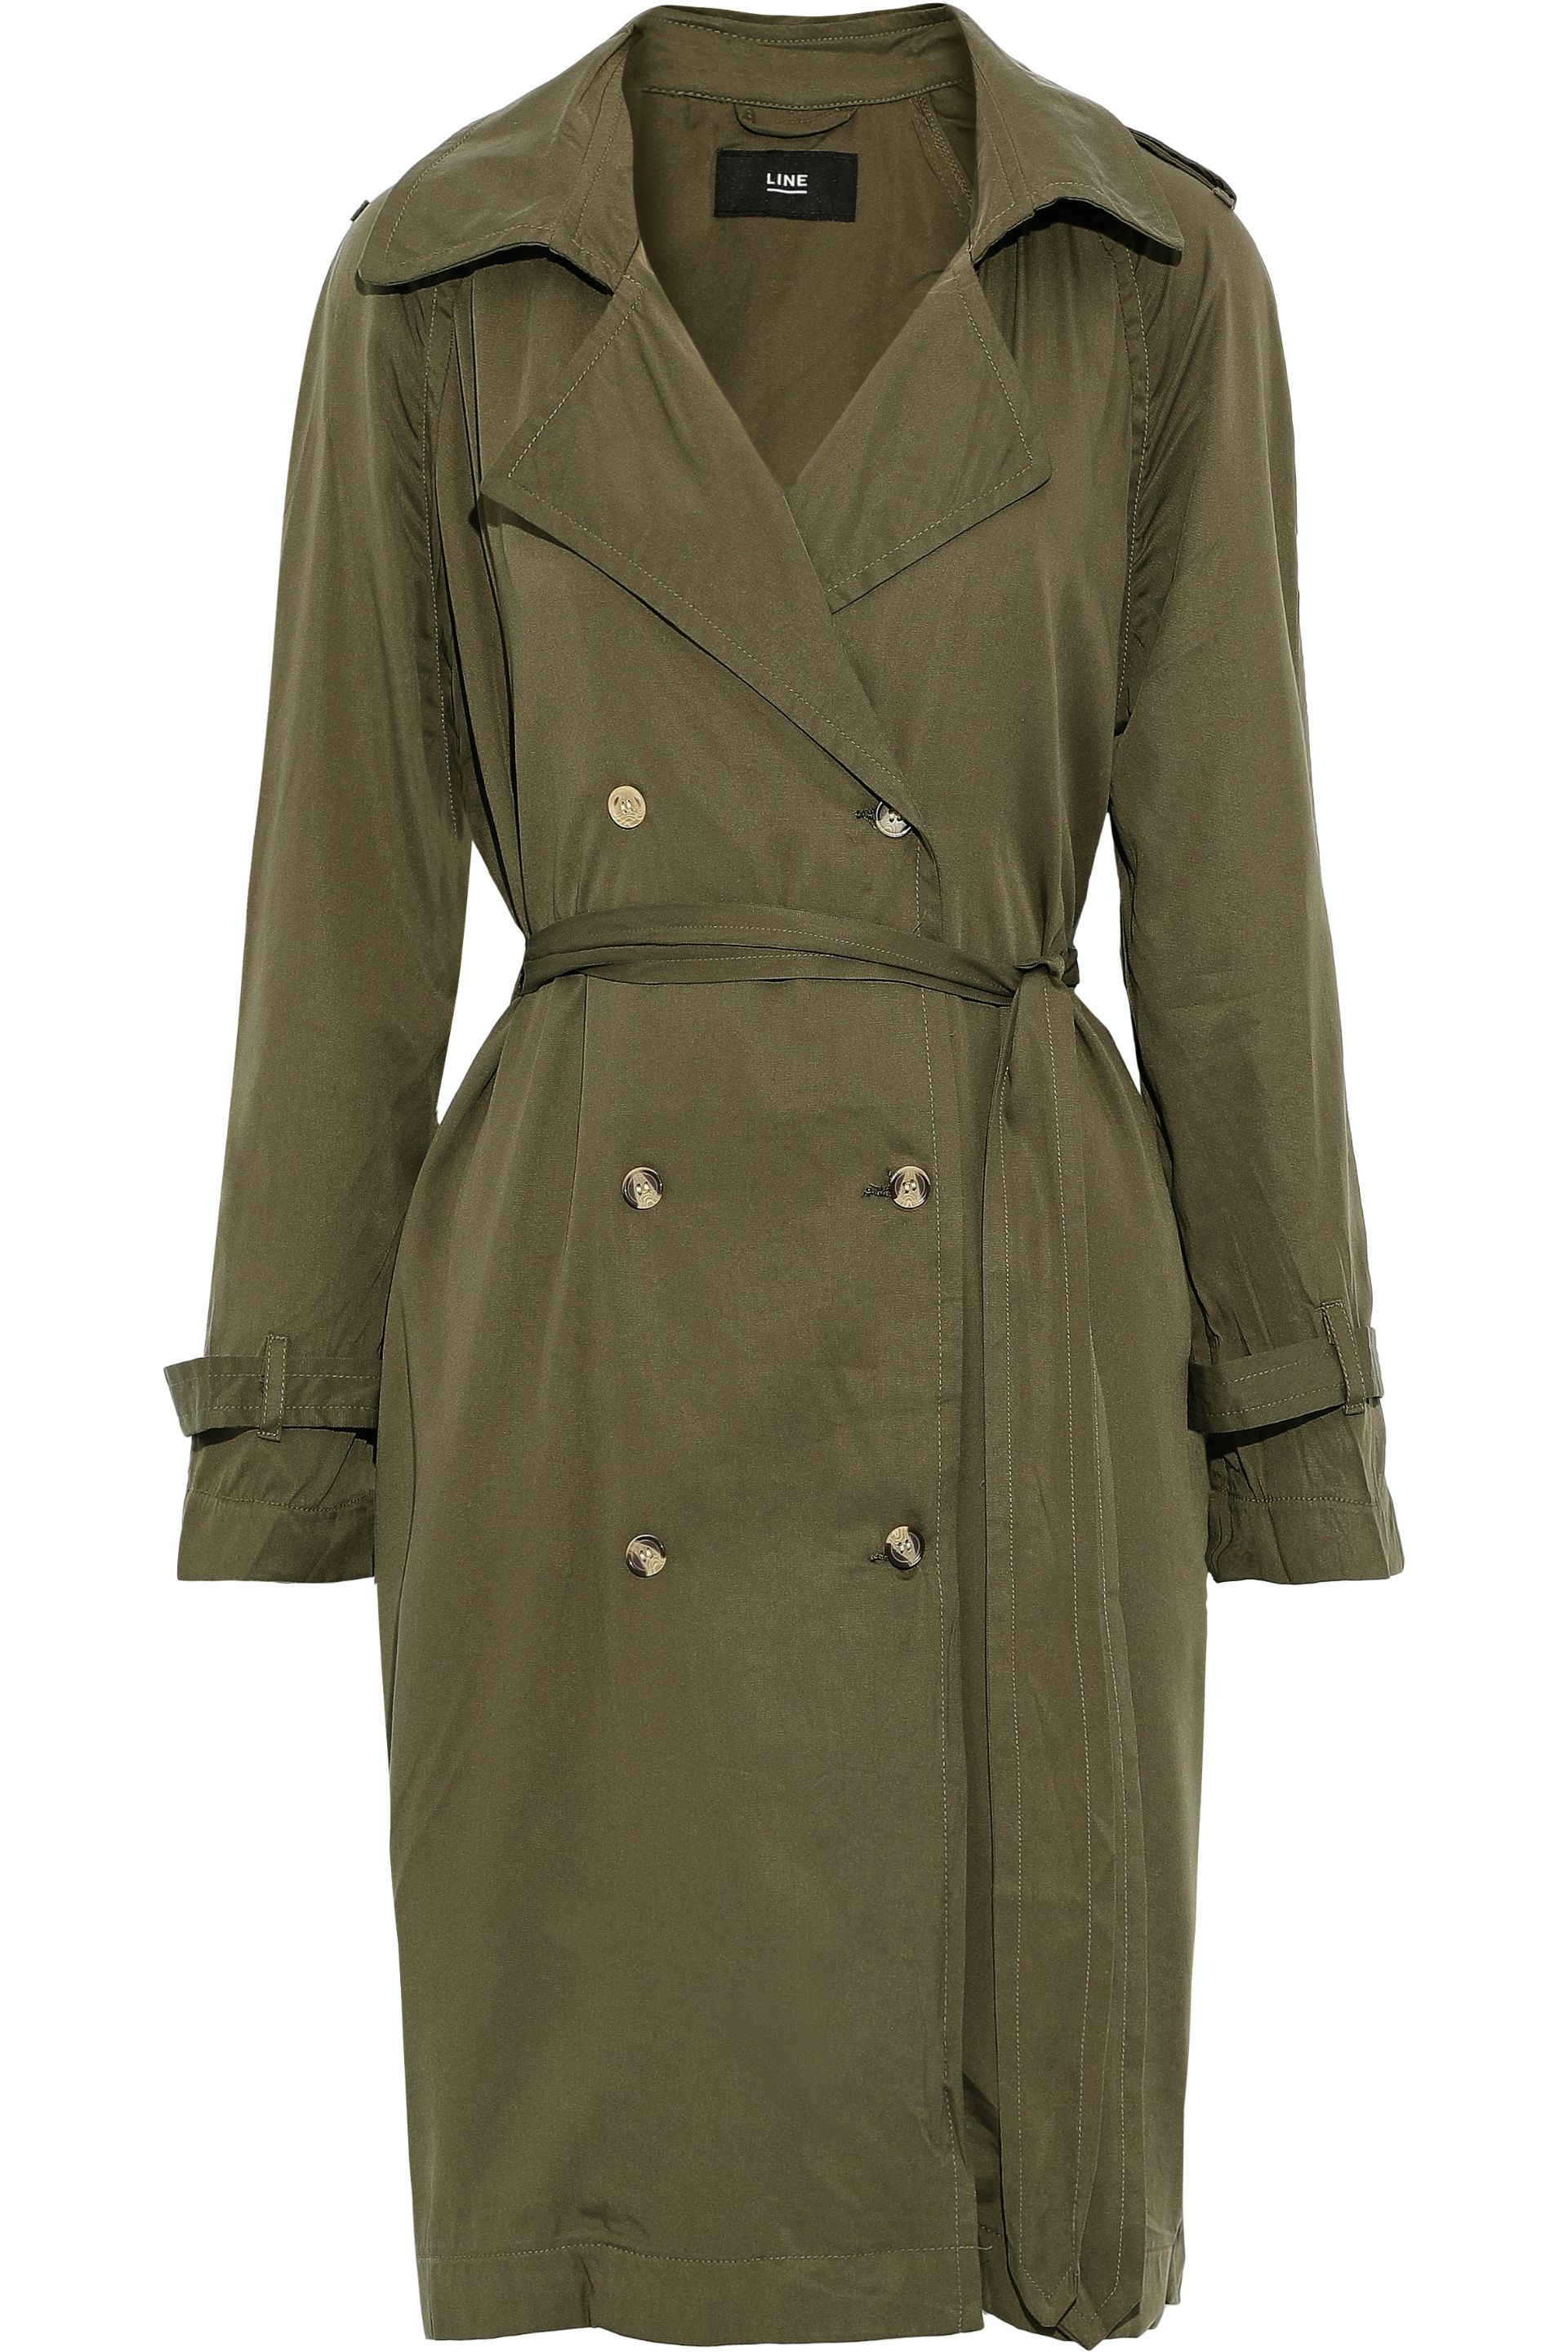 Designer Trench Coats | Sale Up To 70% Off At THE OUTNET